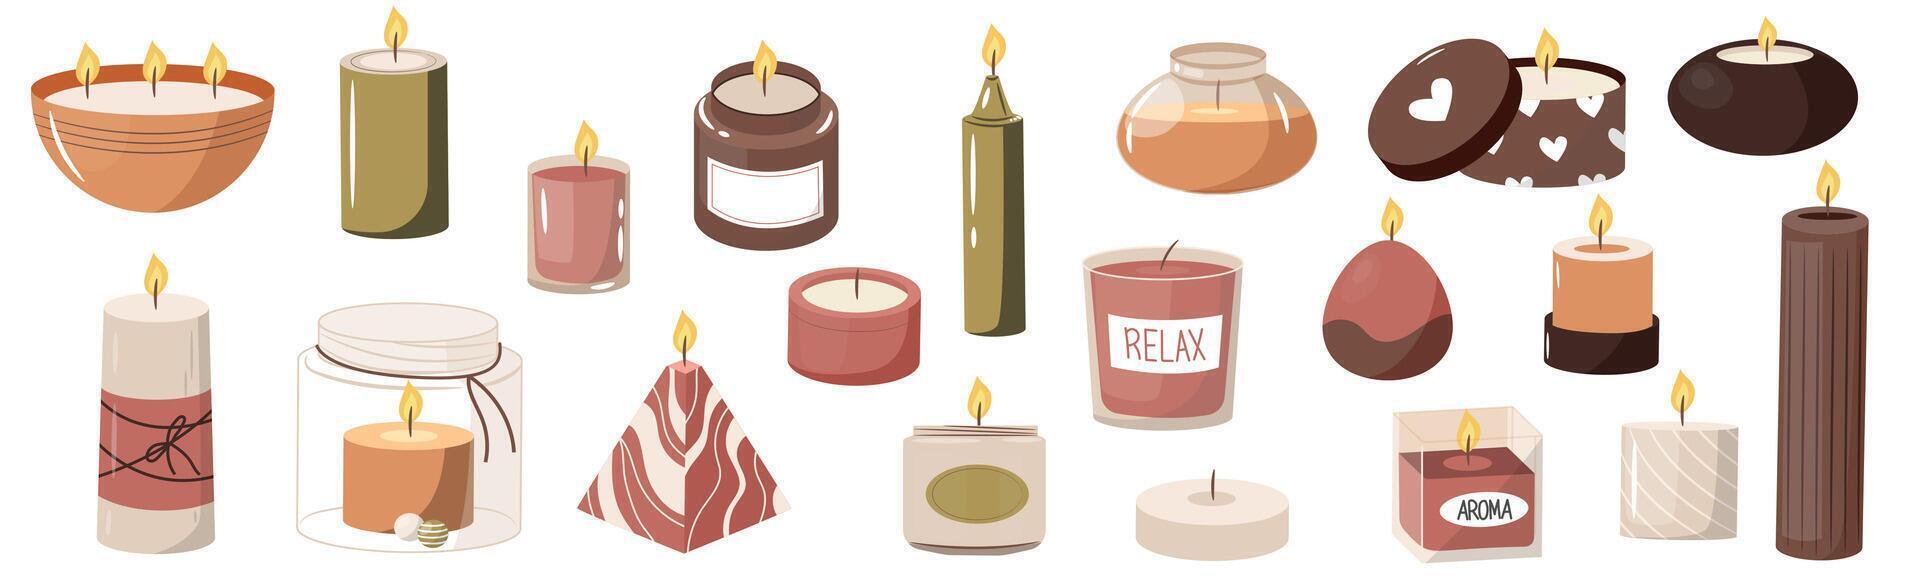 Aroma candles. Cartoon scented wax light, candle with wax and fragrance, spa therapy decoration different shapes. Vector isolated set